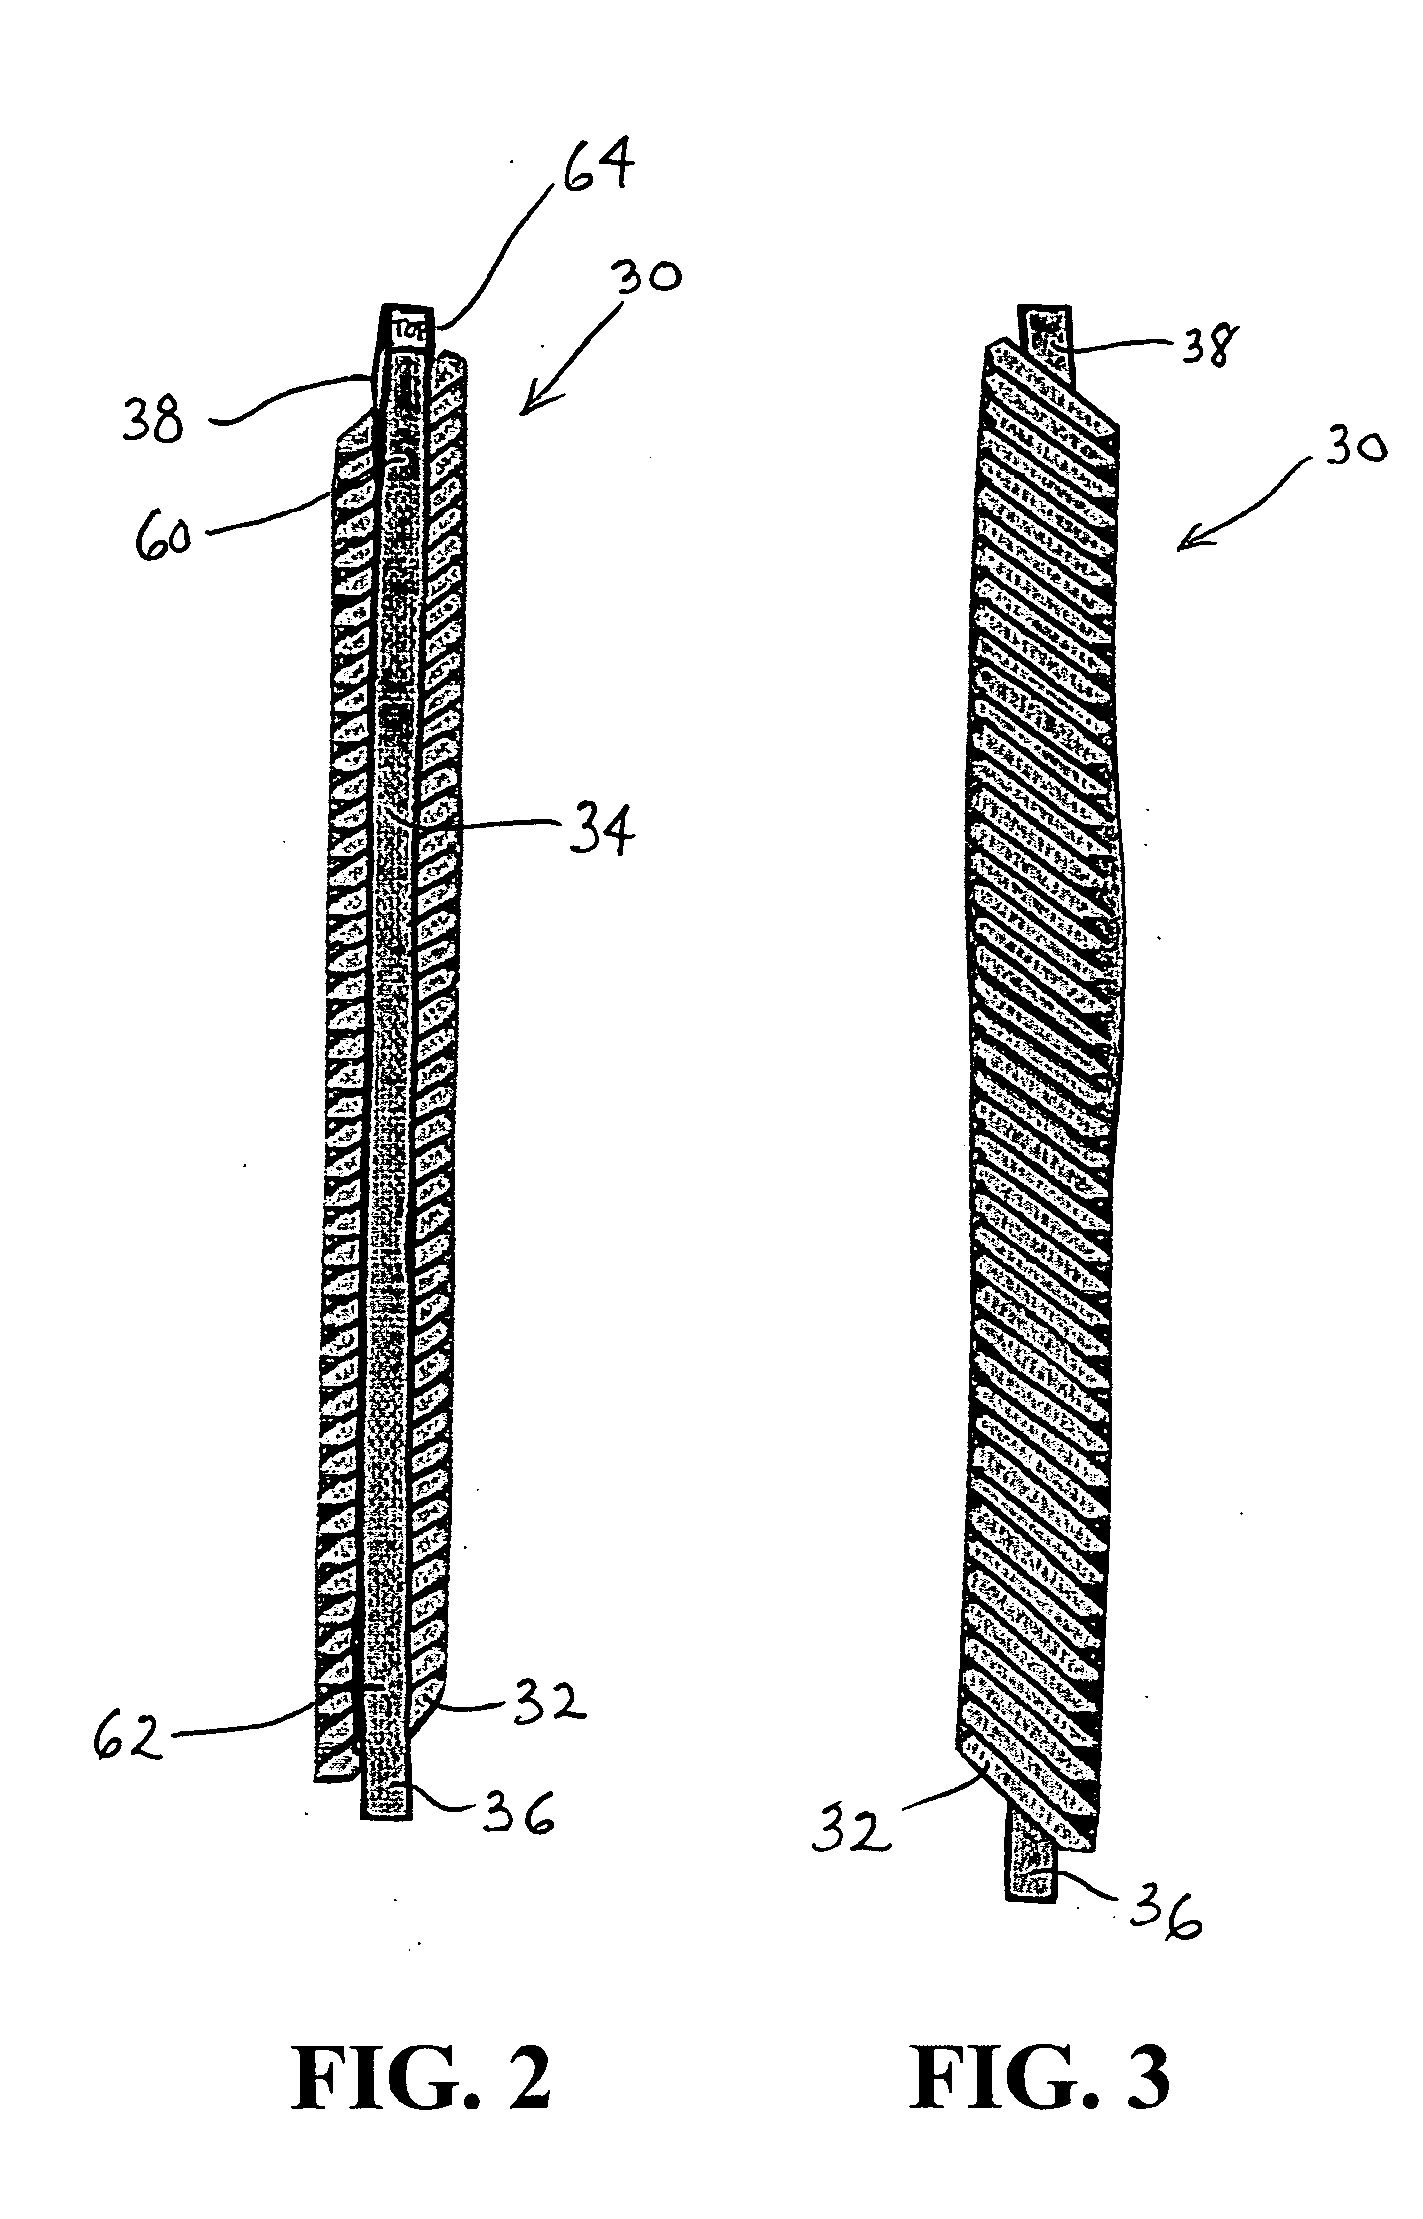 Unitary assembly of biological specimen support articles, and apparatus for dispensing individual biological specimen support articles therefrom